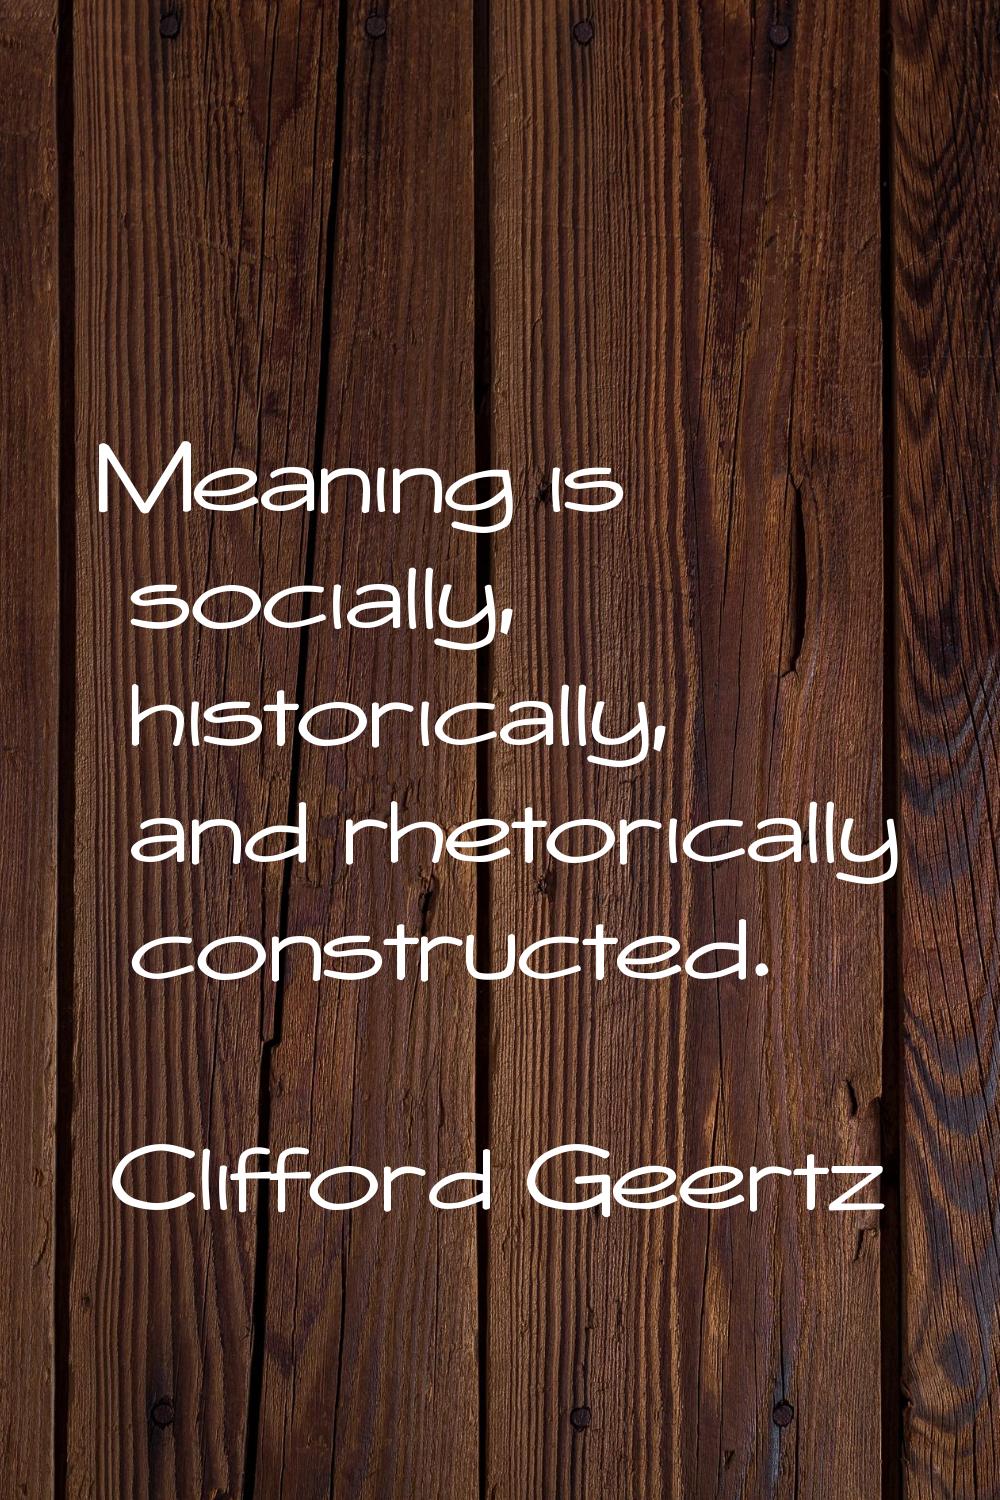 Meaning is socially, historically, and rhetorically constructed.